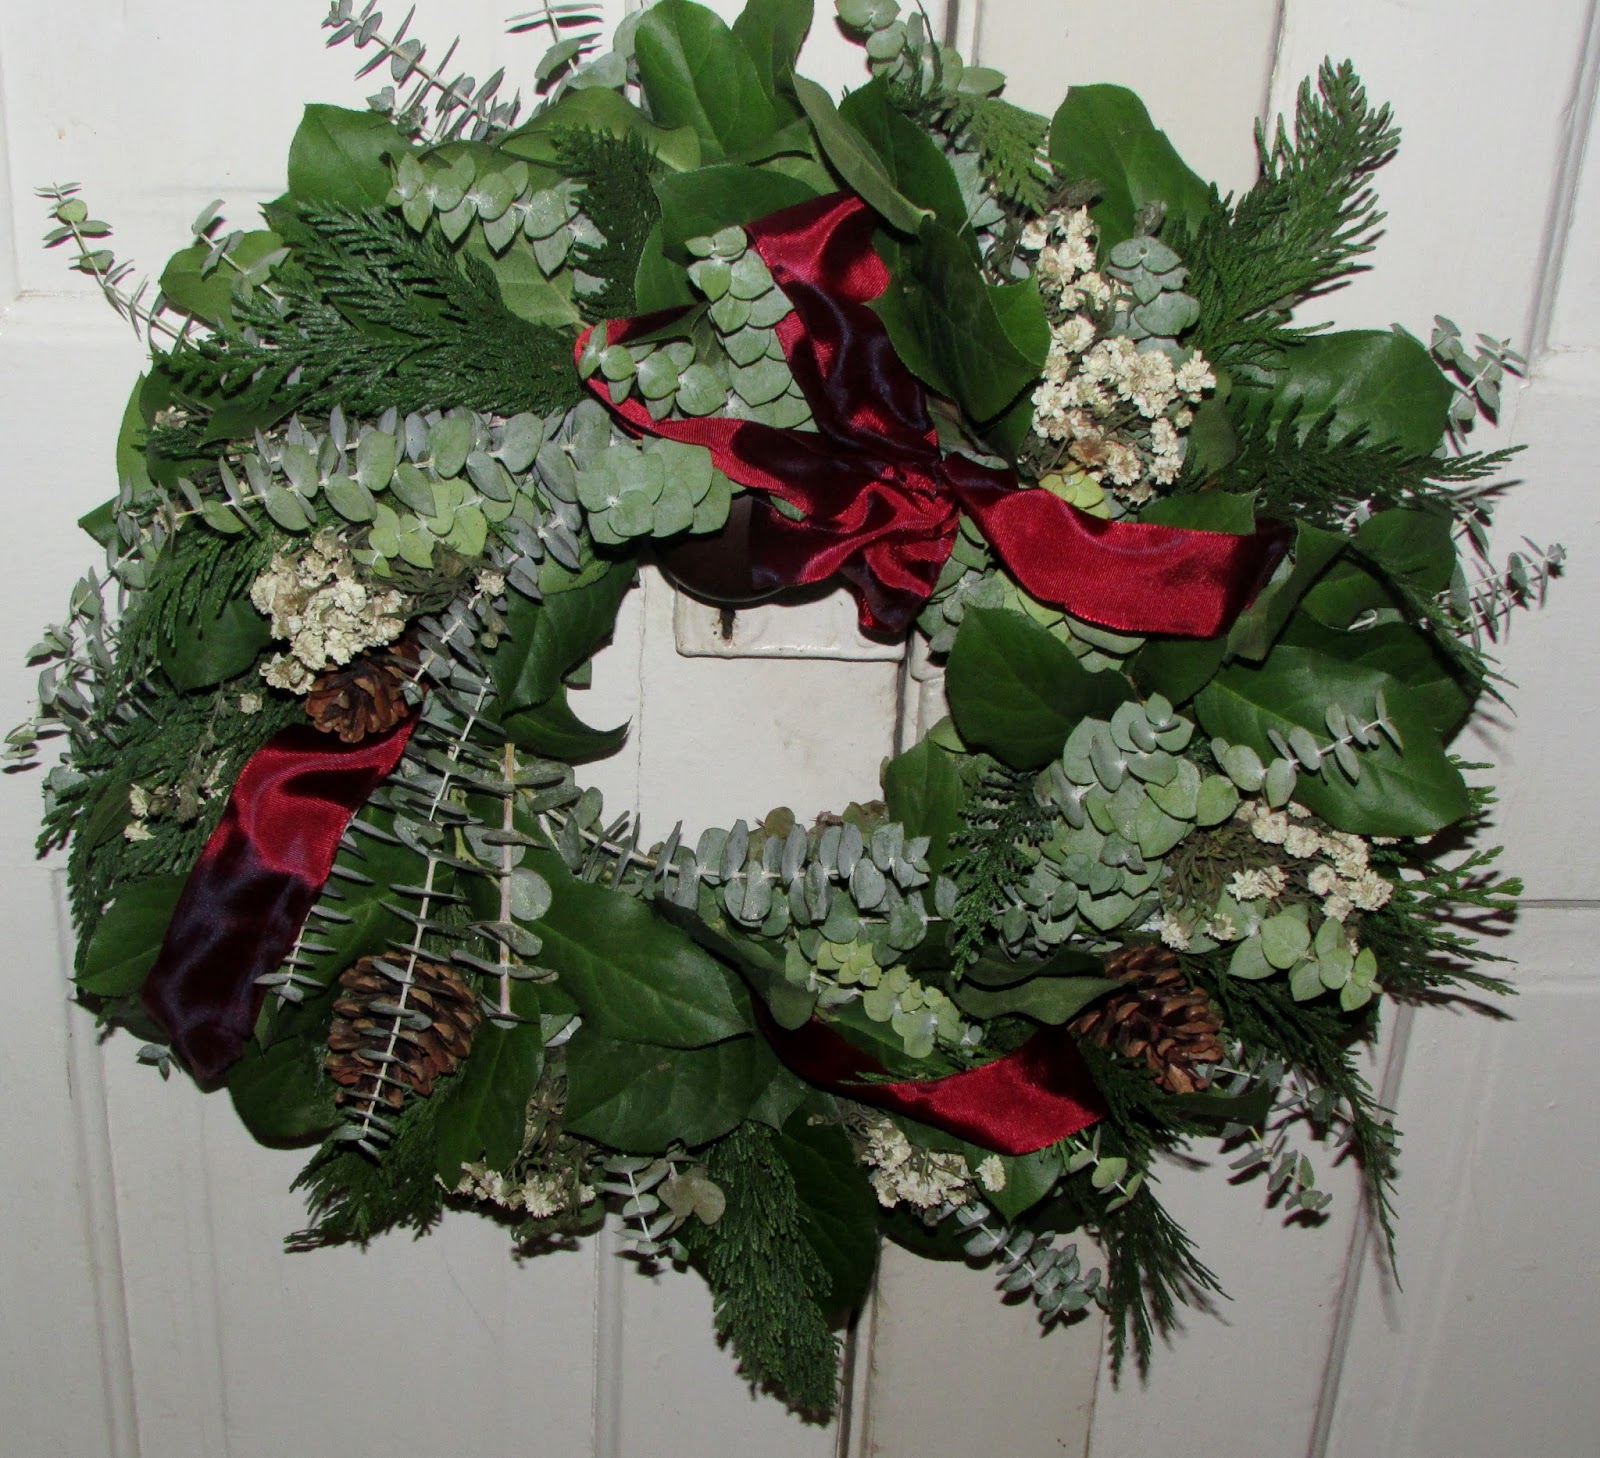 Heck Of A Bunch: Creekside Farms - Holiday Wreath Review and Discount Code